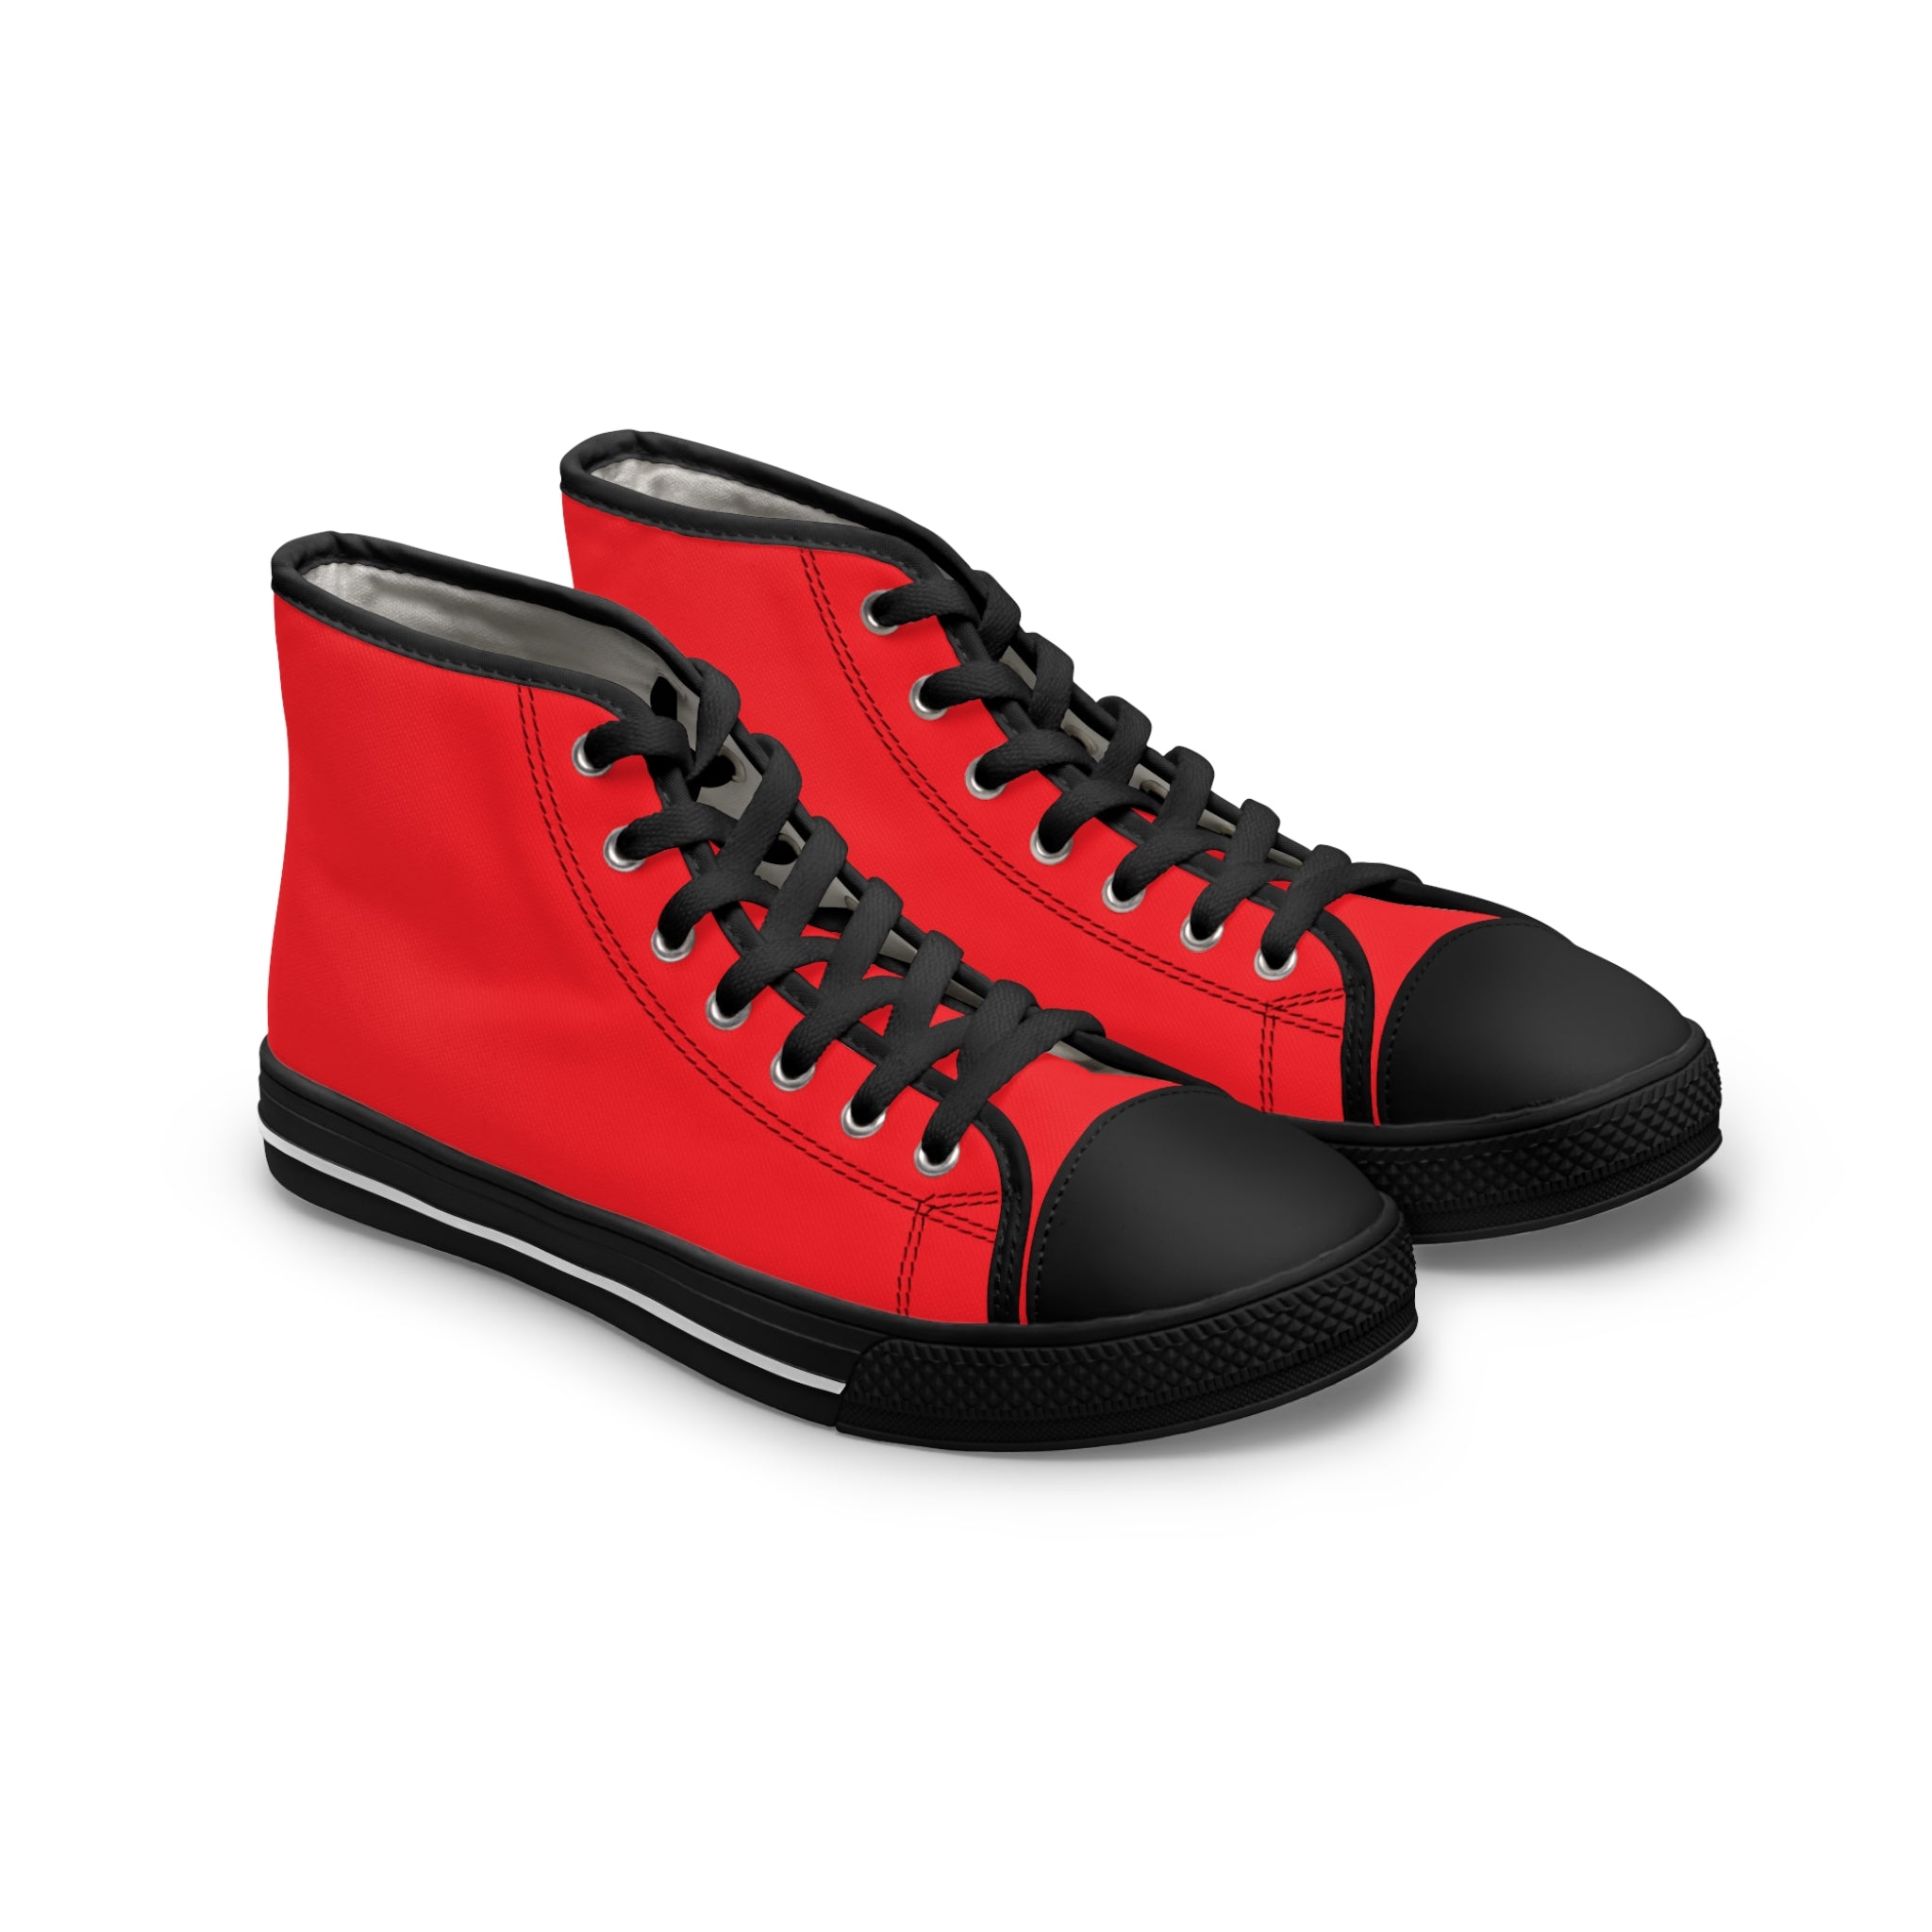 Red Color Ladies' High Tops, Solid Red Color Best Quality Women's High Top Fashion Laced-up Designer Canvas Sneakers Tennis Shoes (US Size: 5.5-12)